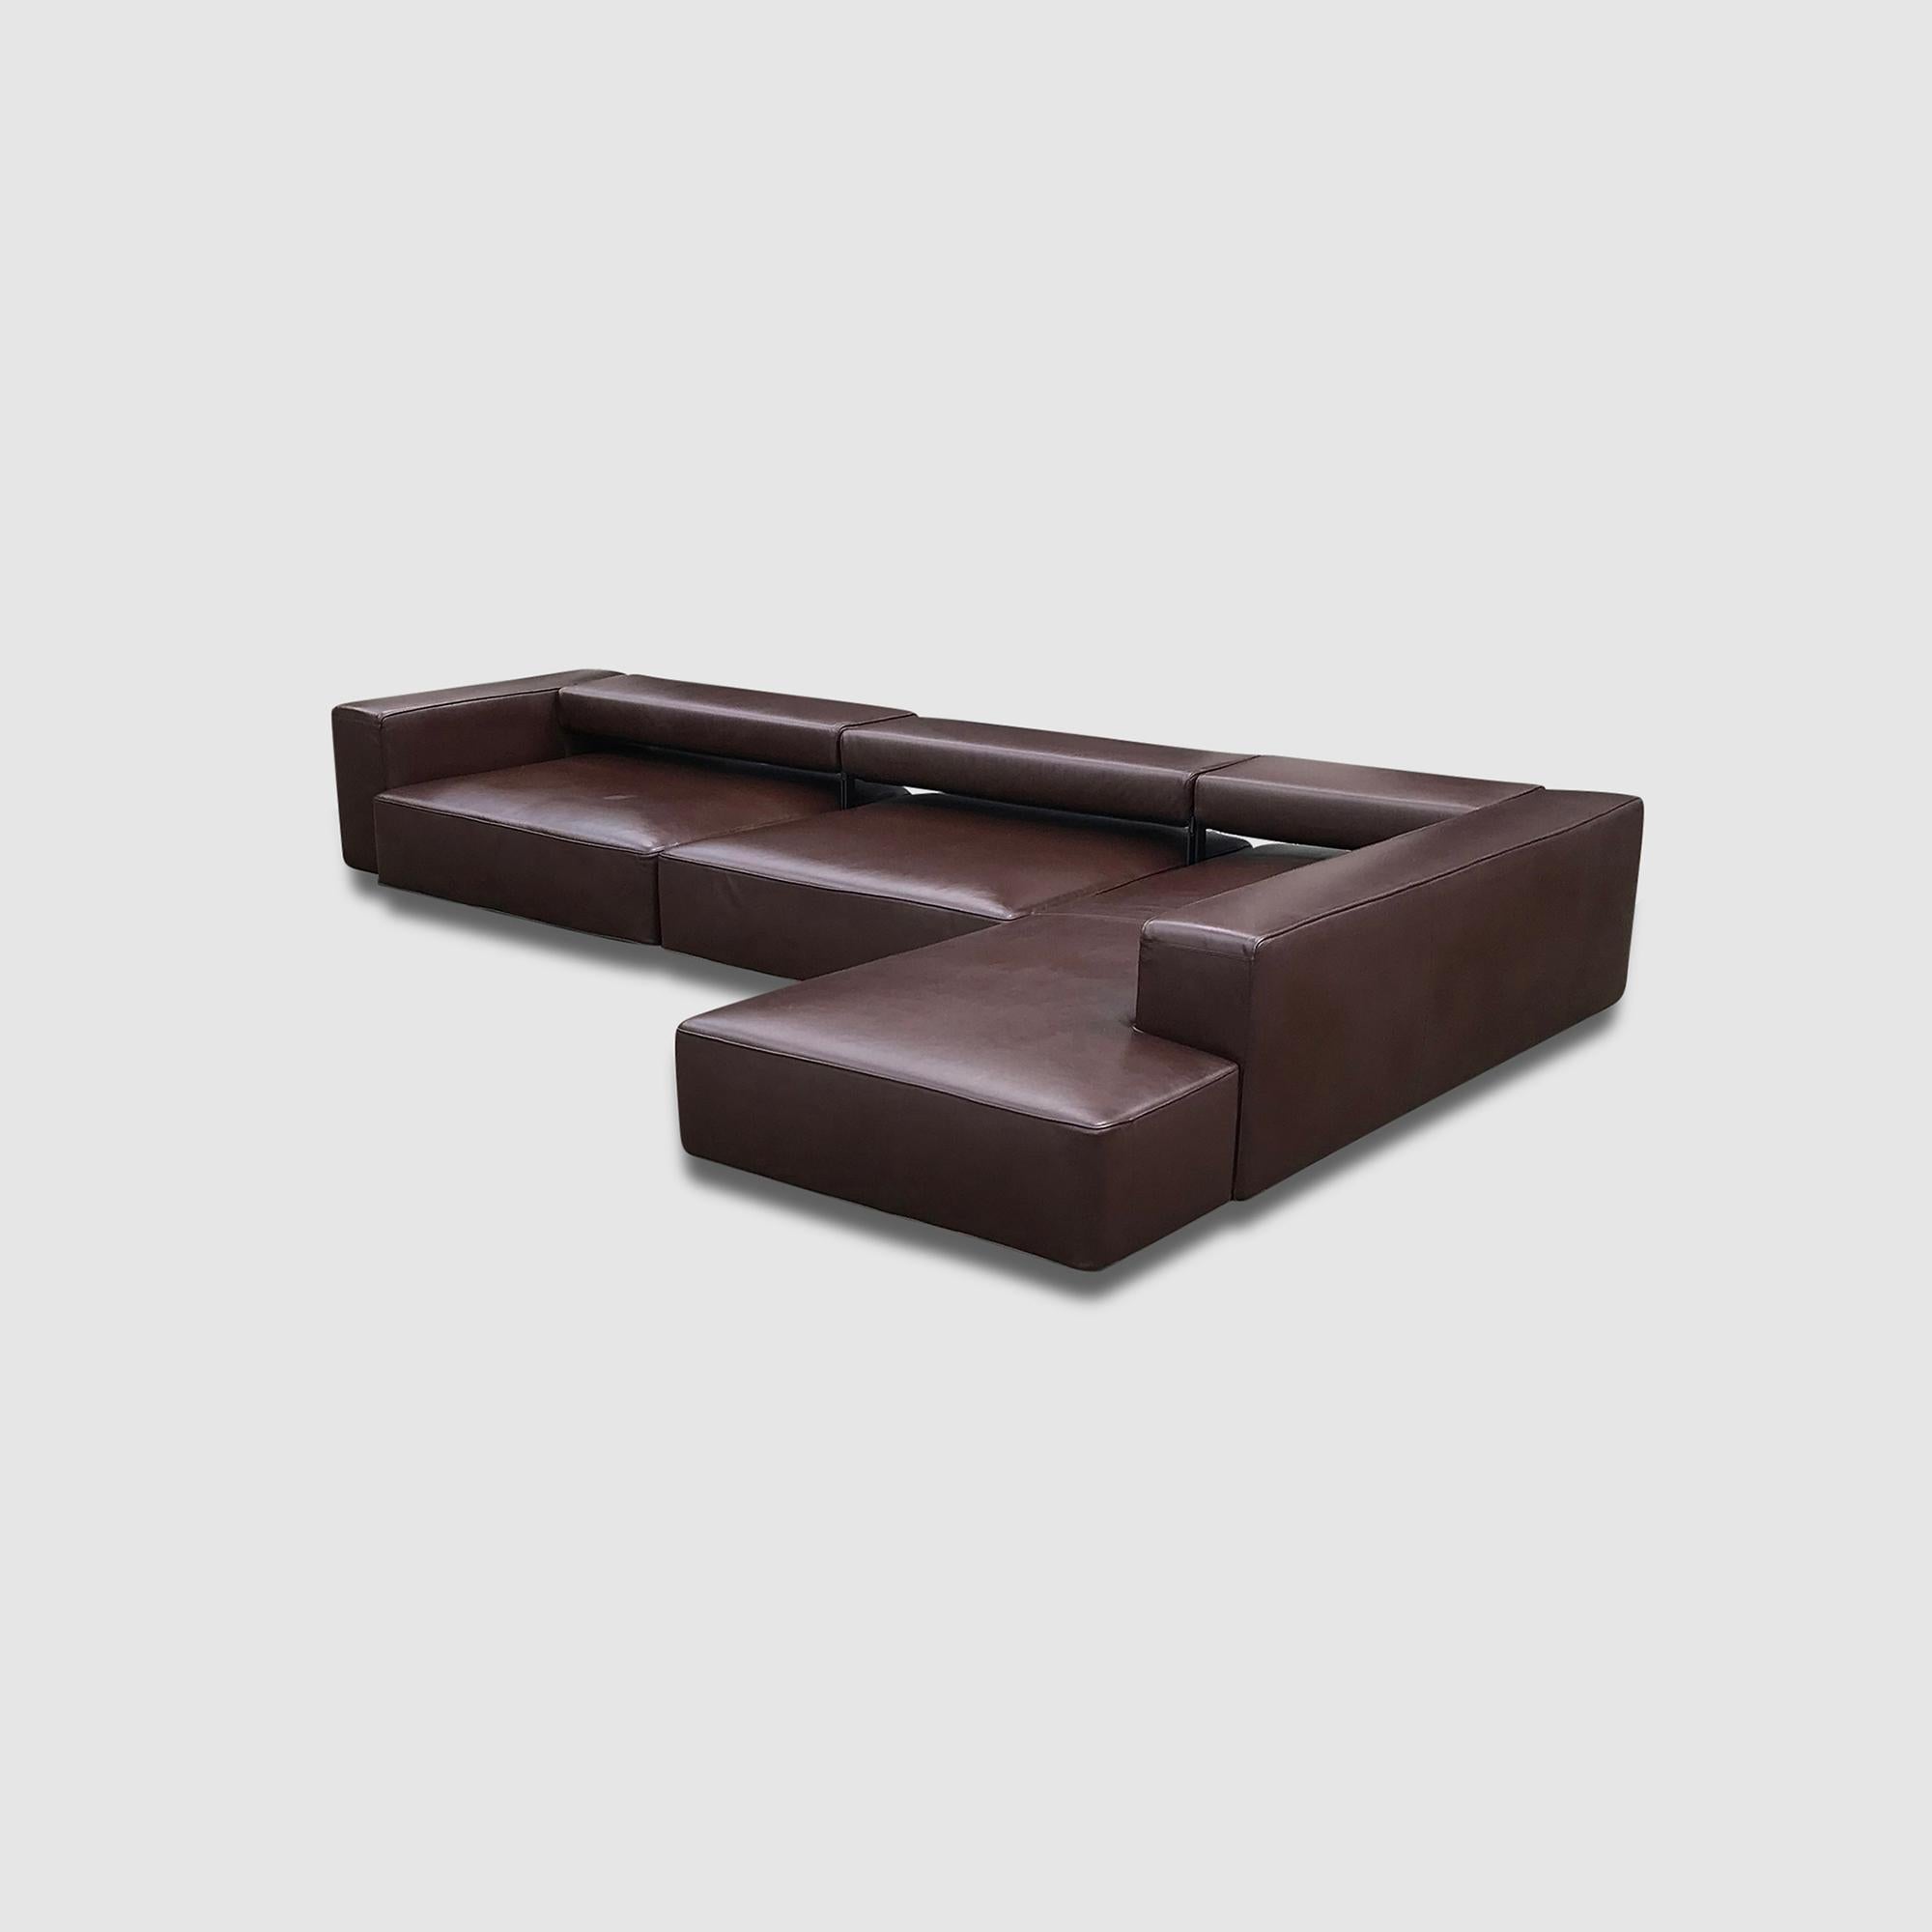 Modular Leather Andy Landscape Sofa by Paolo Piva for B&B Italia 2013 1